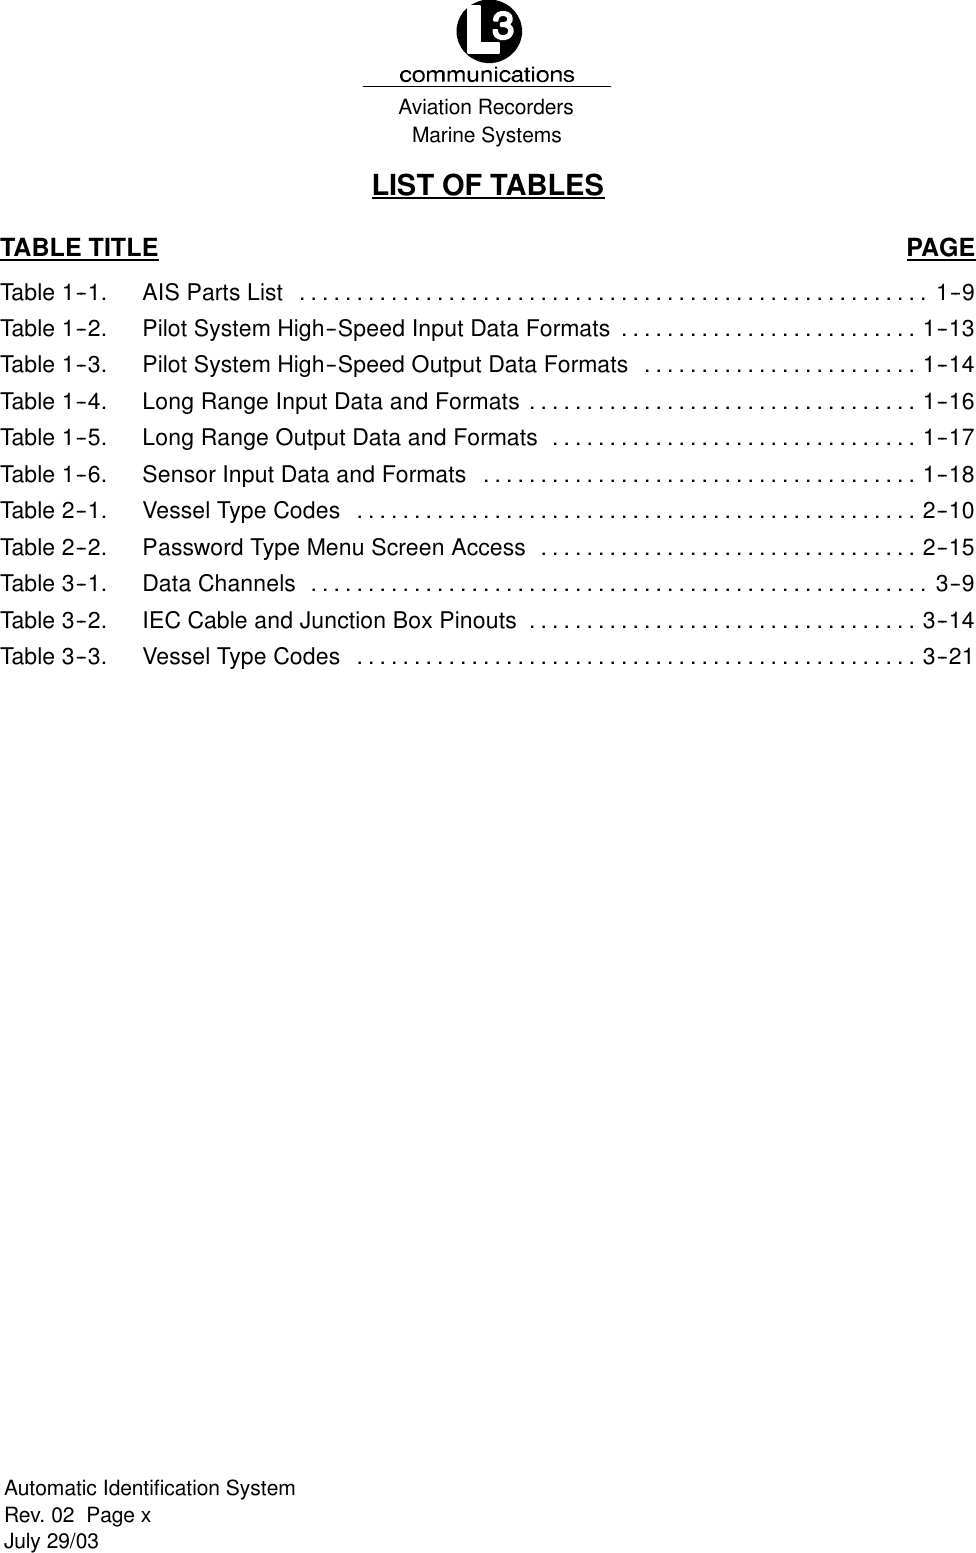 Marine SystemsAviation RecordersRev. 02 Page xJuly 29/03Automatic Identification SystemLIST OF TABLESTABLE TITLE PAGETable 1--1. AIS Parts List 1--9.......................................................Table 1--2. Pilot System High--Speed Input Data Formats 1--13..........................Table 1--3. Pilot System High--Speed Output Data Formats 1--14........................Table 1--4. Long Range Input Data and Formats 1--16..................................Table 1--5. Long Range Output Data and Formats 1--17................................Table 1--6. Sensor Input Data and Formats 1--18......................................Table 2--1. Vessel Type Codes 2--10.................................................Table 2--2. Password Type Menu Screen Access 2--15.................................Table 3--1. Data Channels 3--9......................................................Table 3--2. IEC Cable and Junction Box Pinouts 3--14..................................Table 3--3. Vessel Type Codes 3--21.................................................